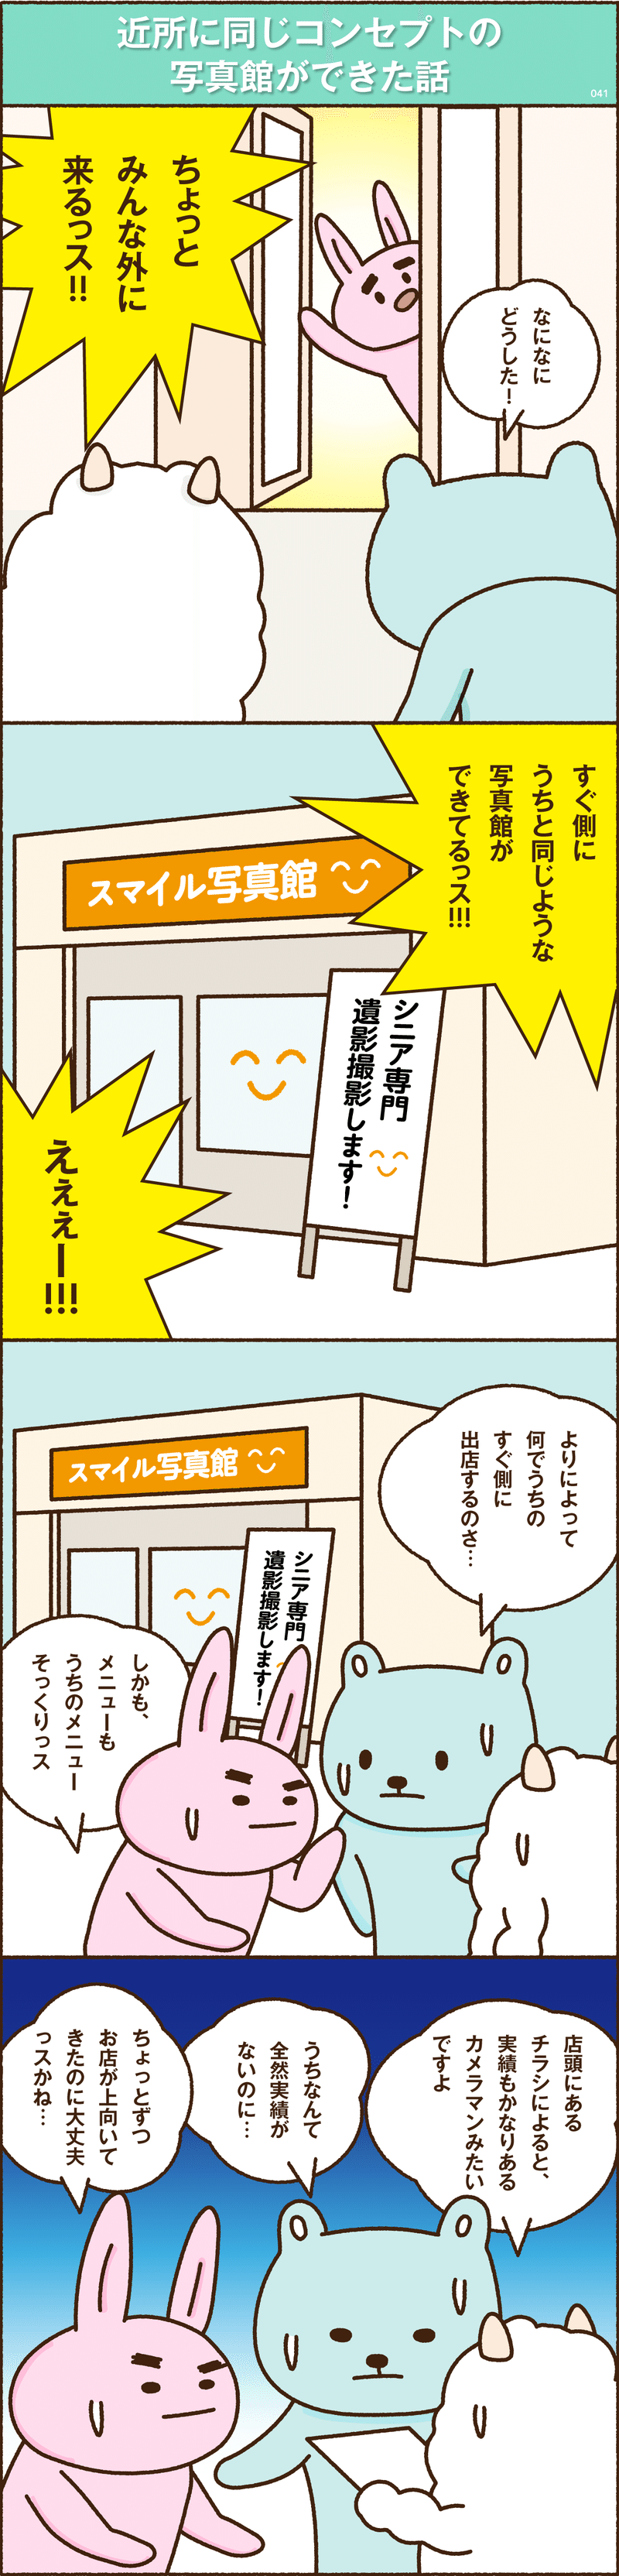 note漫画_2部_#041_アートボード 1